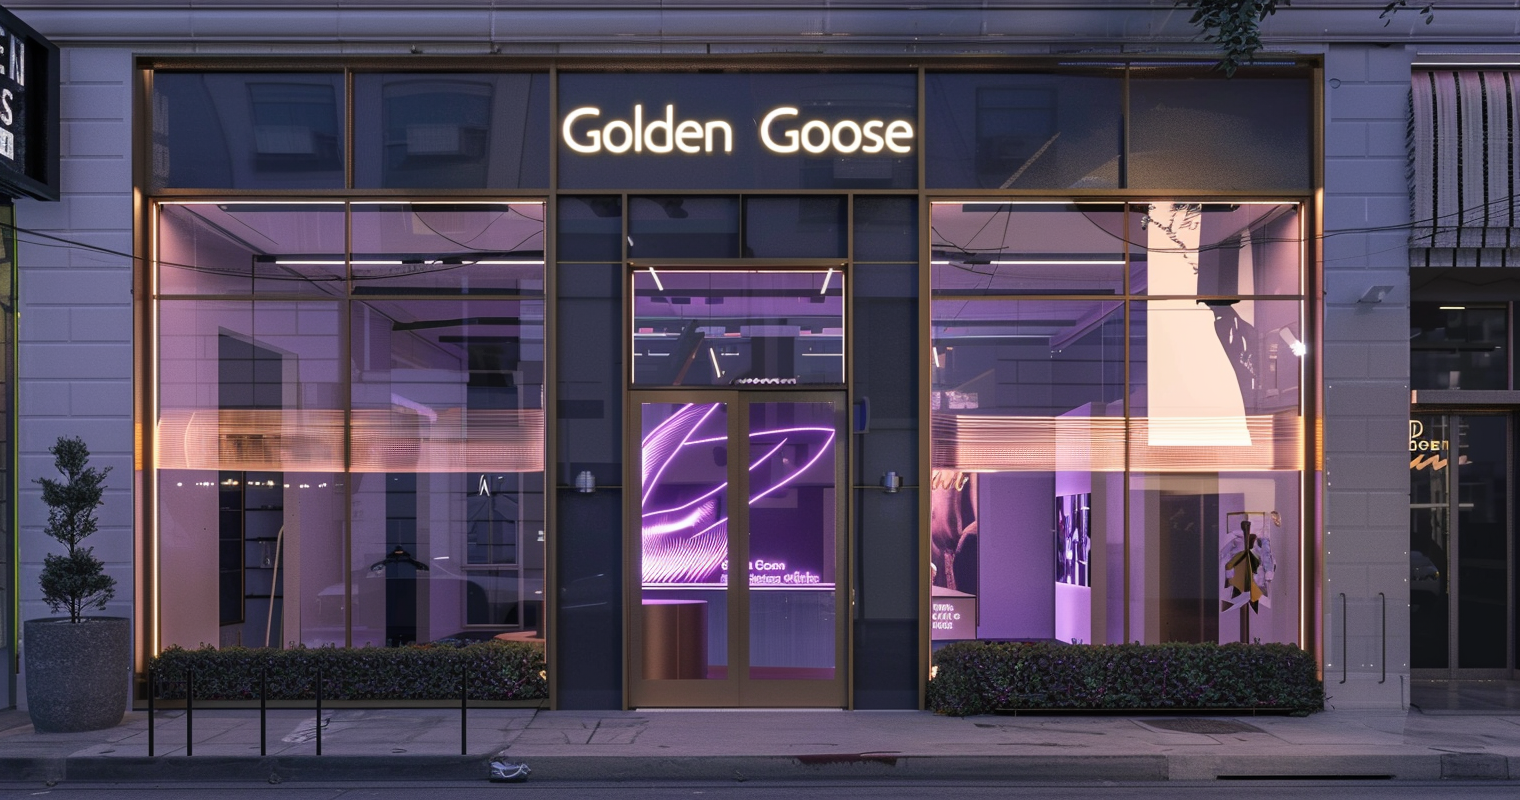 Golden Goose for sneakers is an example of an arbitrary trademark